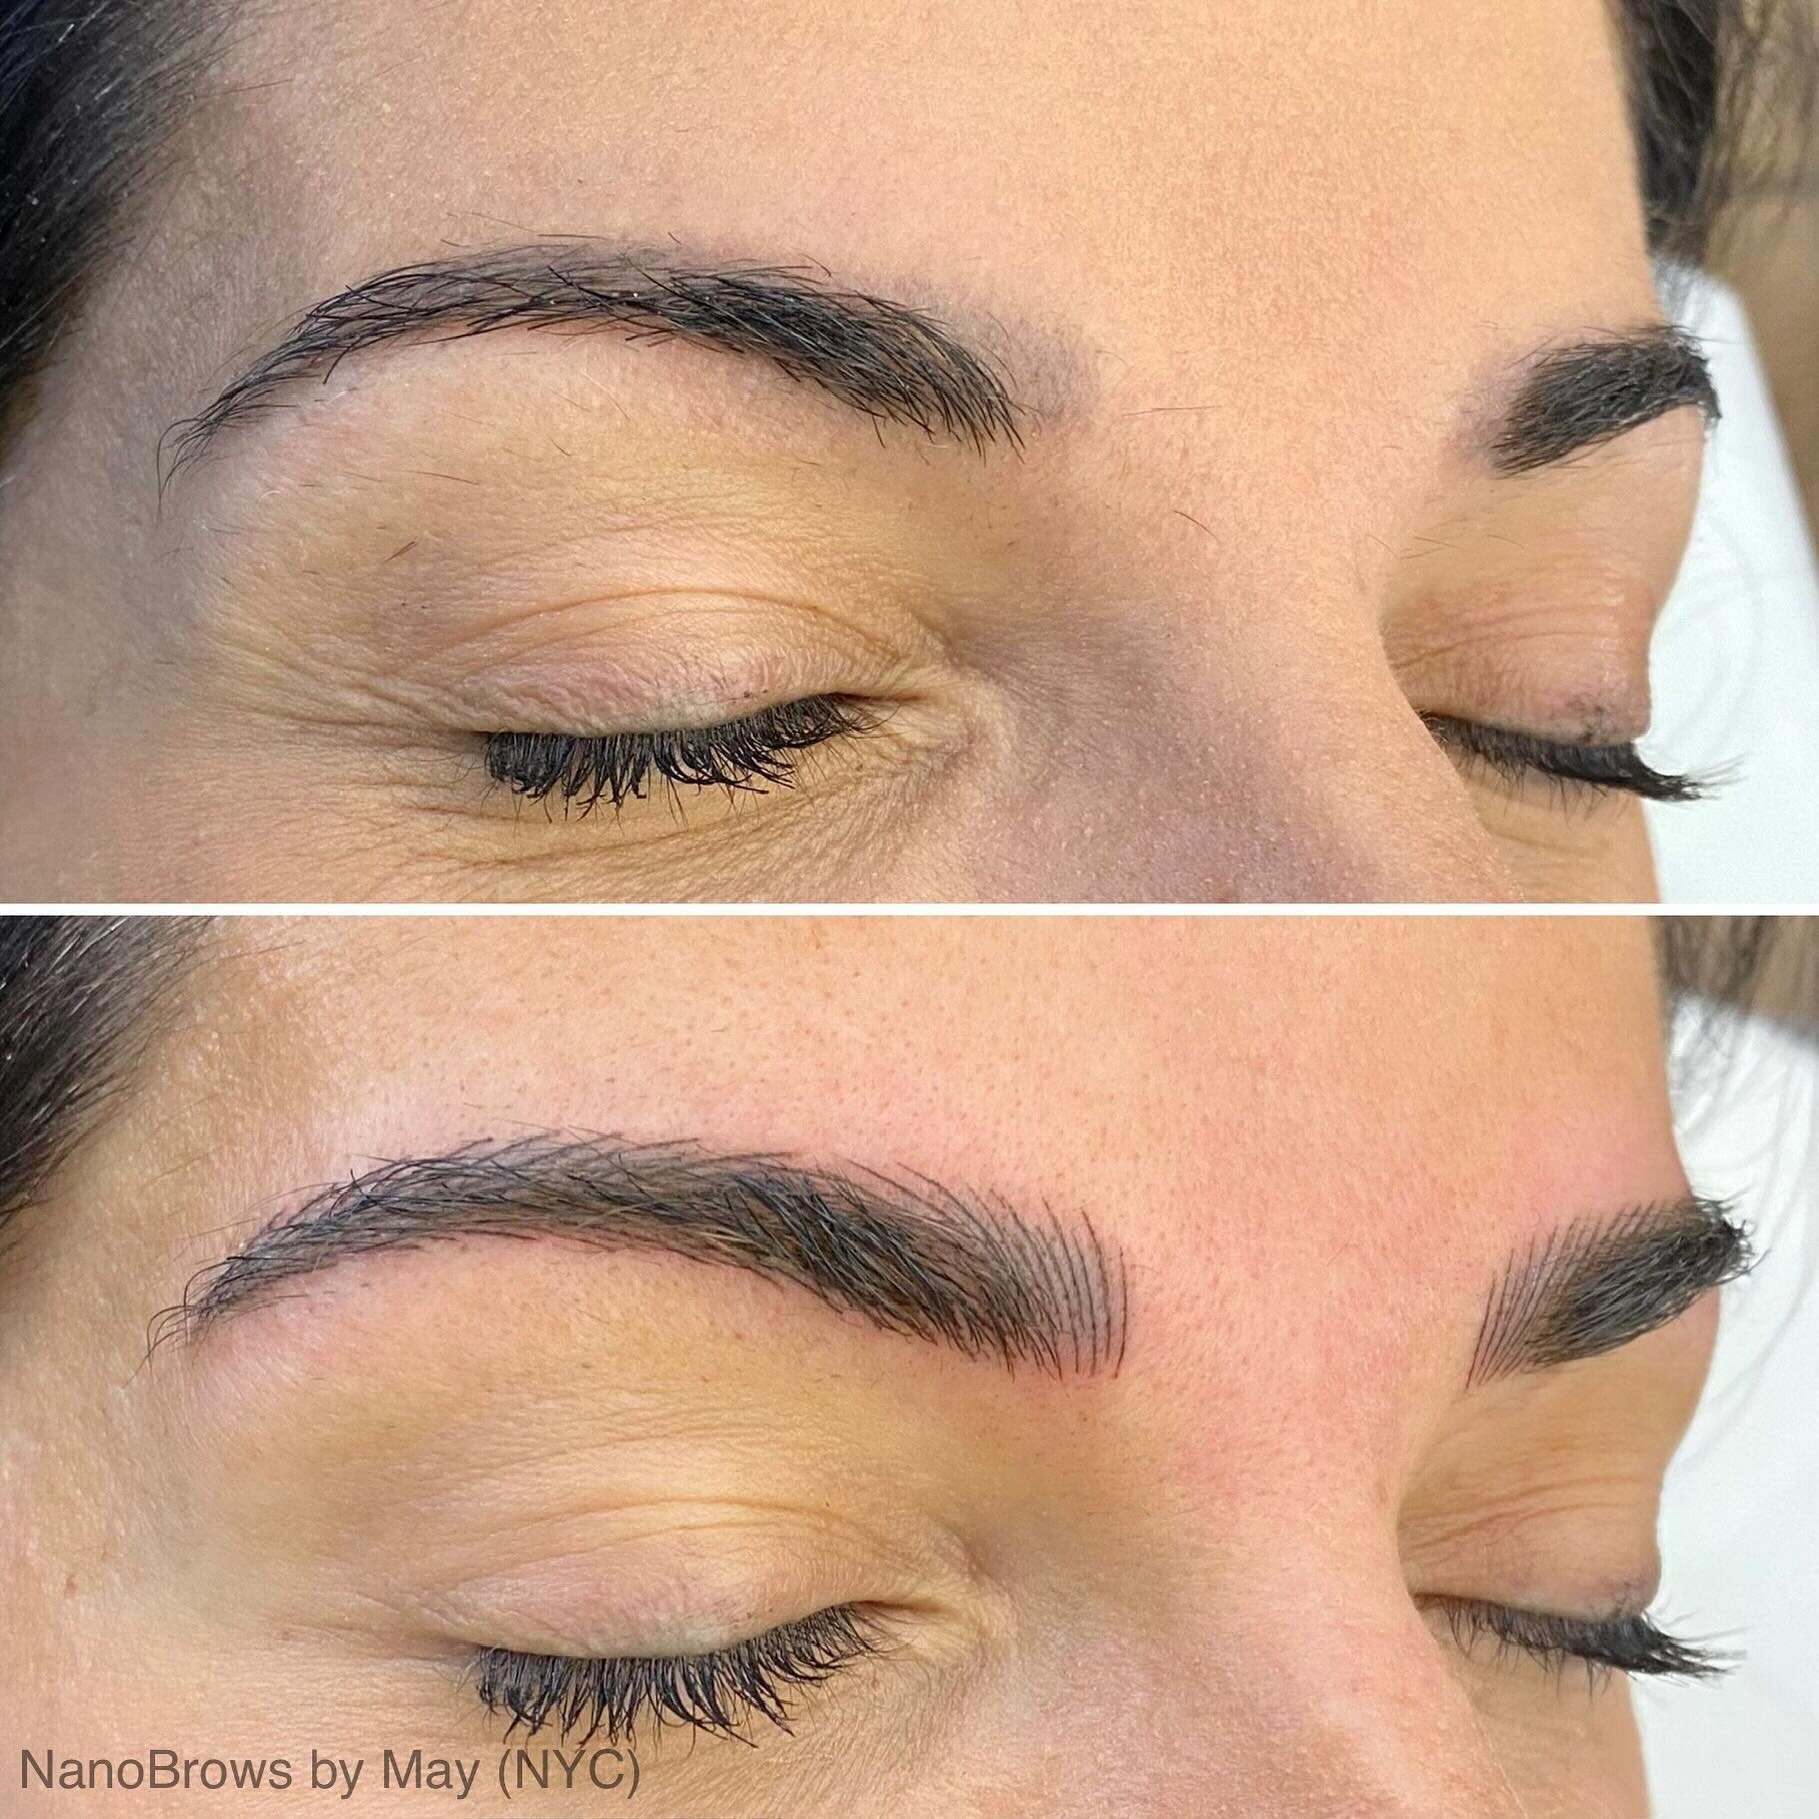 From tip to tail, each brow stroke has its place. NanoBrows blend seamlessly with existing hair, for that most natural look. 
.
NanoBrows by May (NYC)
.
#nanobrows #nanoeyebrows #pmu #pmuartist #brows #browsbrowsbrows #browsonpoint #browgoals